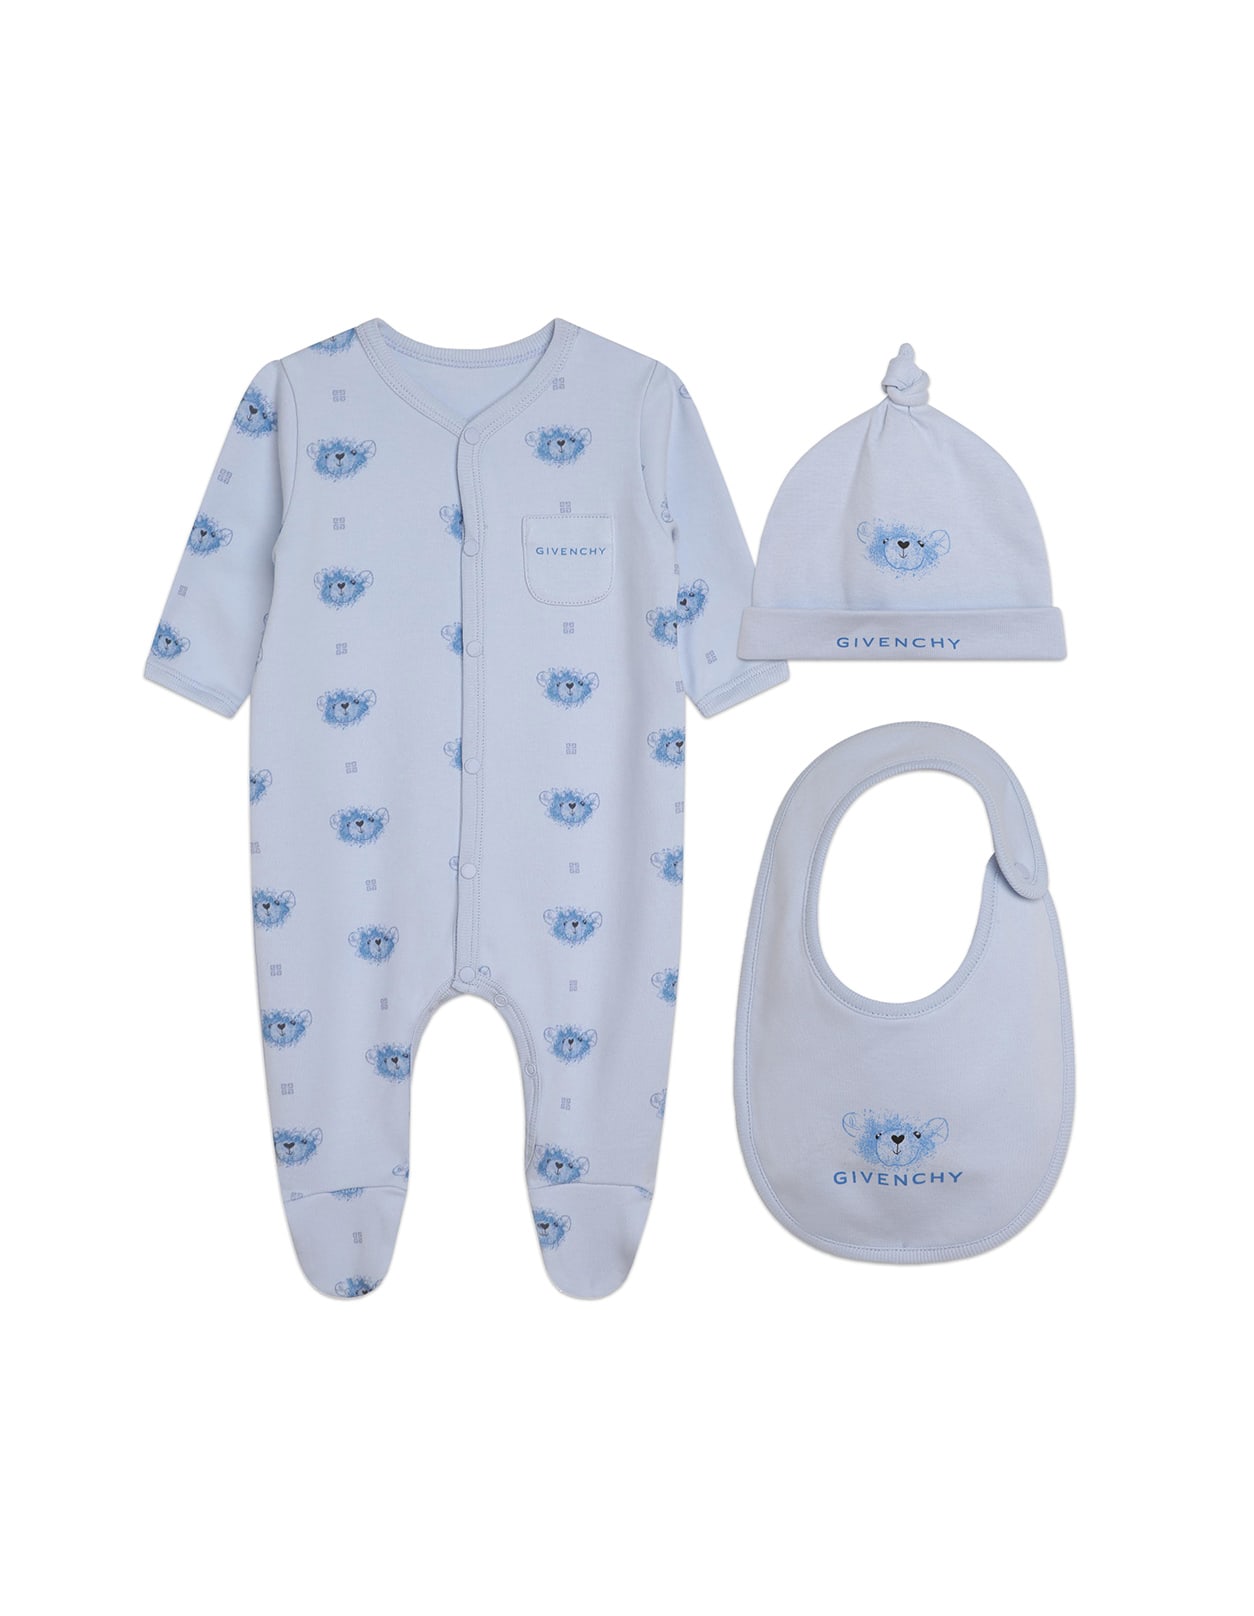 GIVENCHY PLAYSUIT, BEANIE AND BIB SET IN LIGHT BLUE WITH PRINT